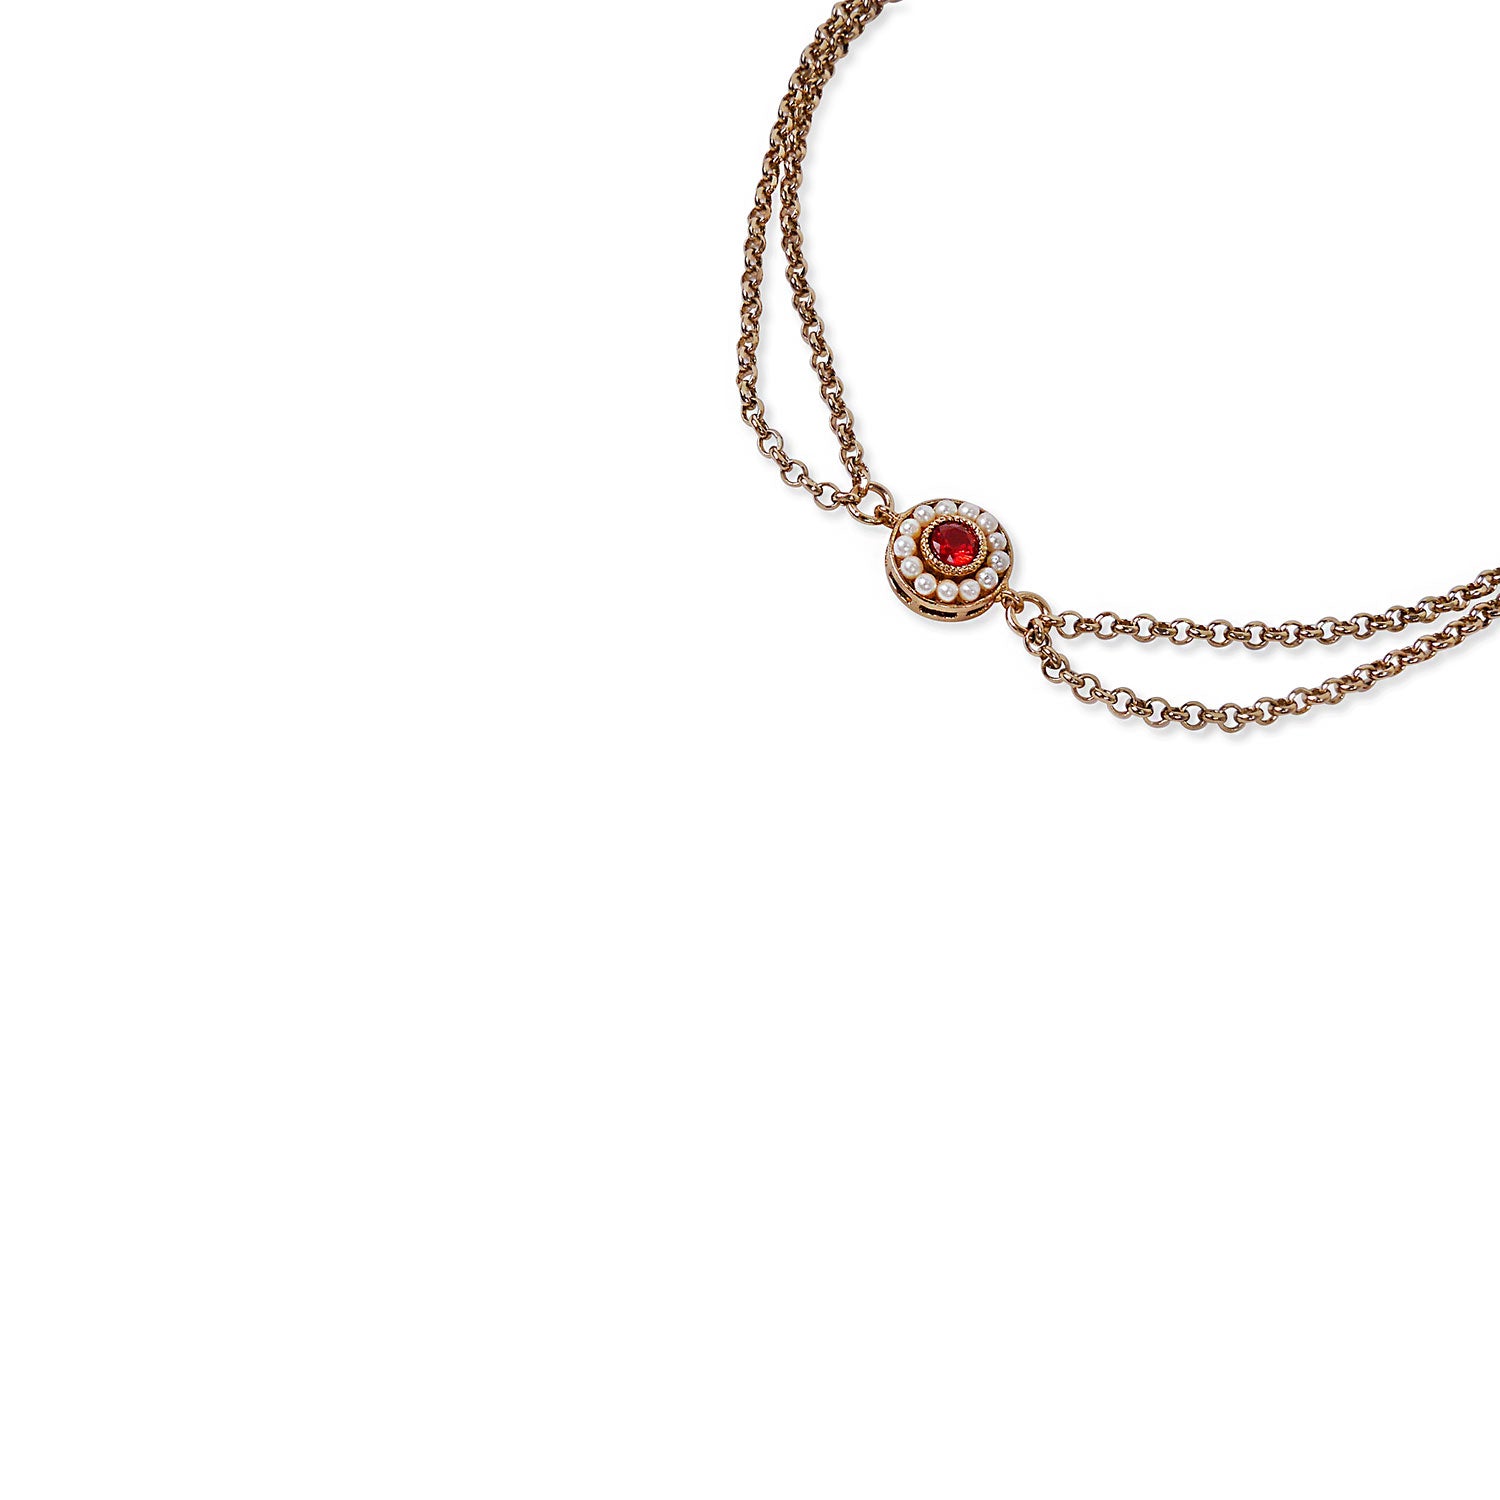 Leela Double Chain Anklet in Red